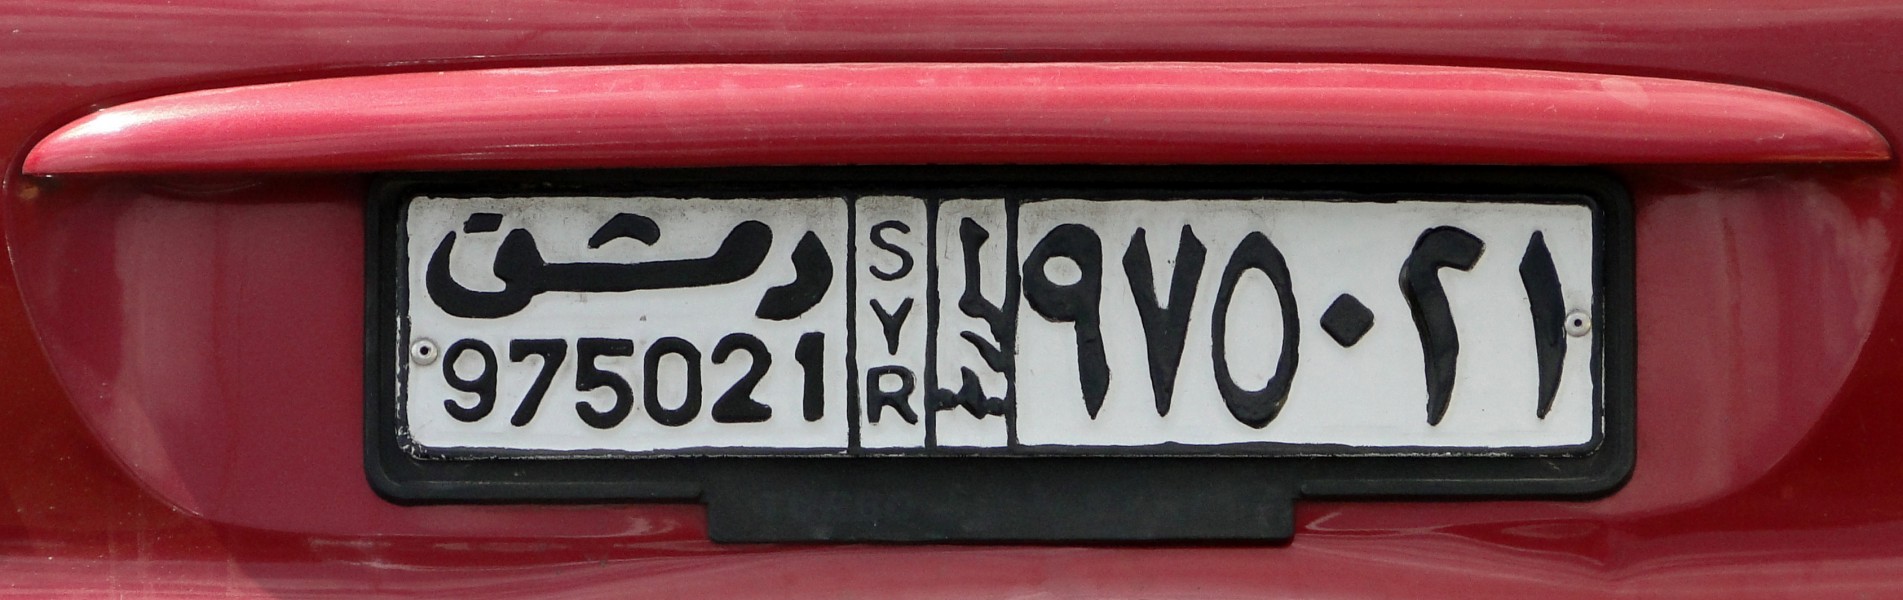 License plate of Syria 01